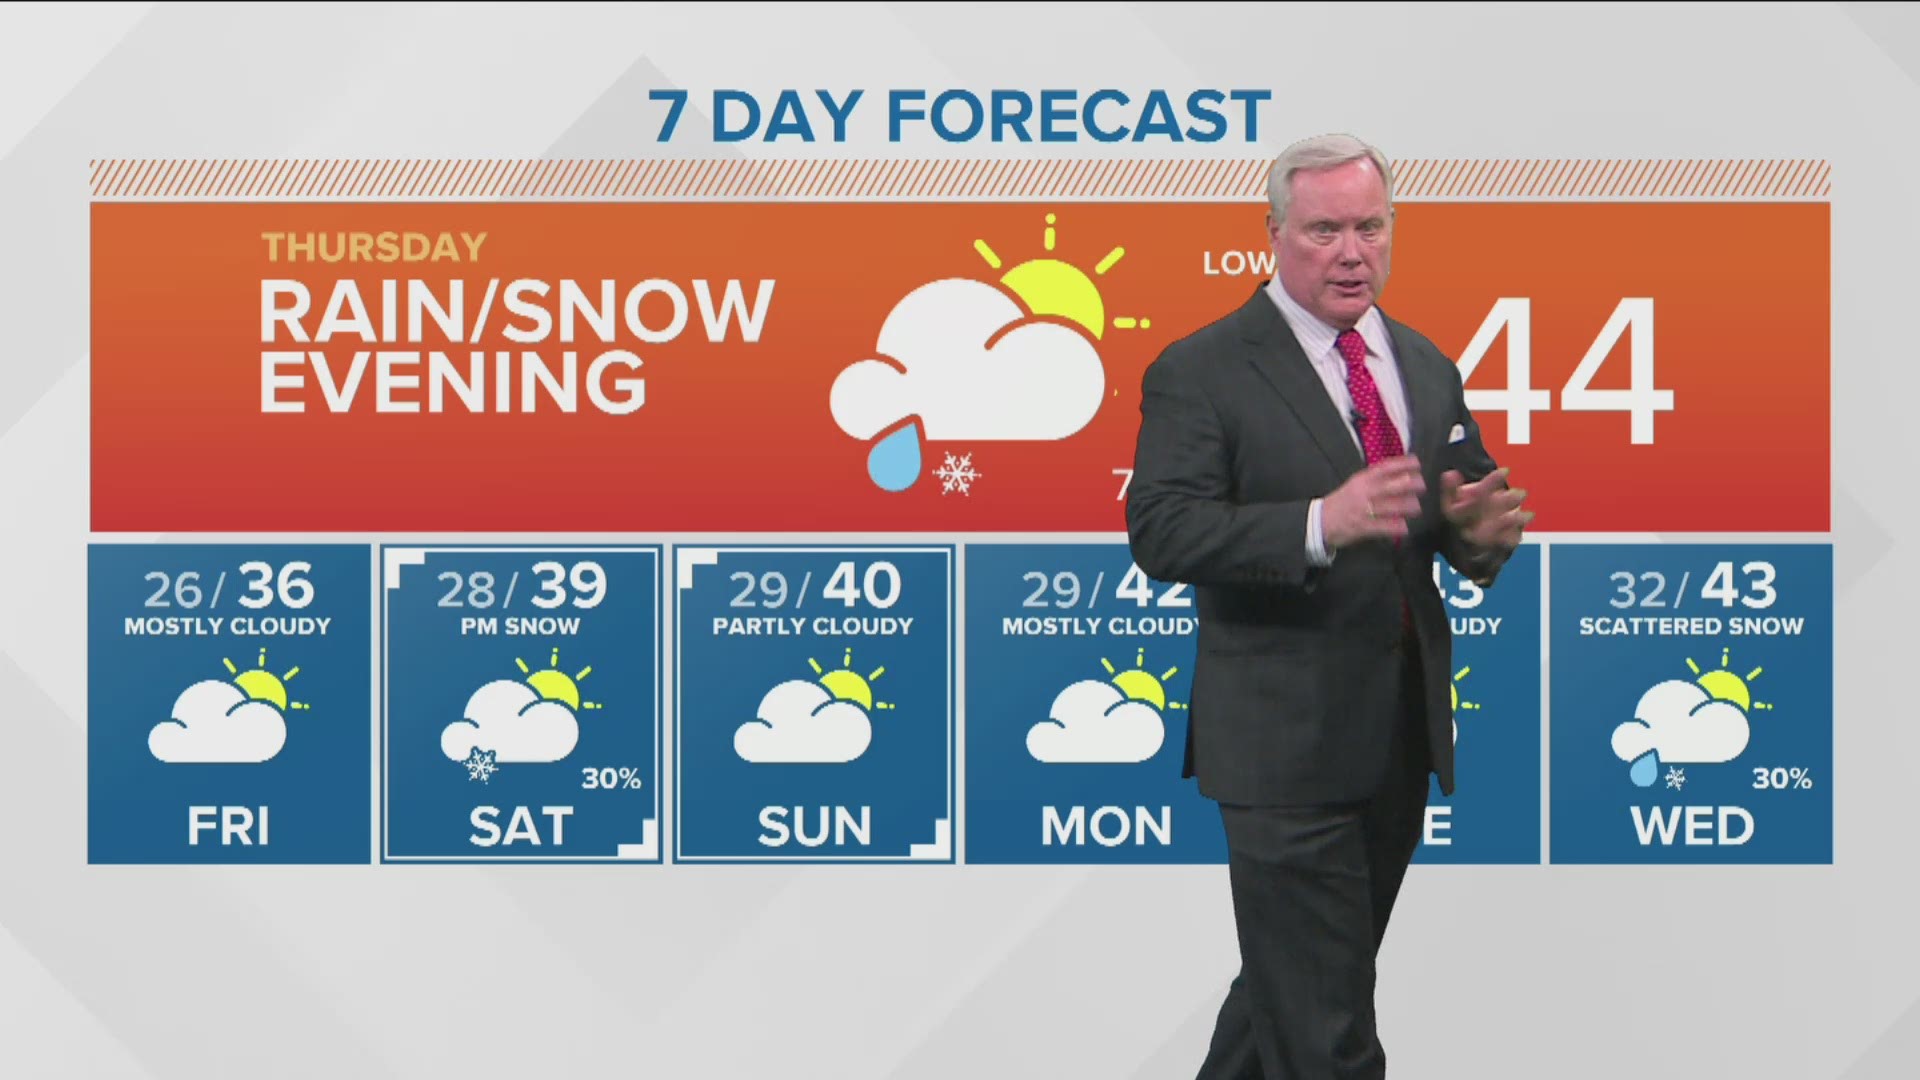 Rick Lantz says there will be a mix of rain and snow with highs in the mid 40s.